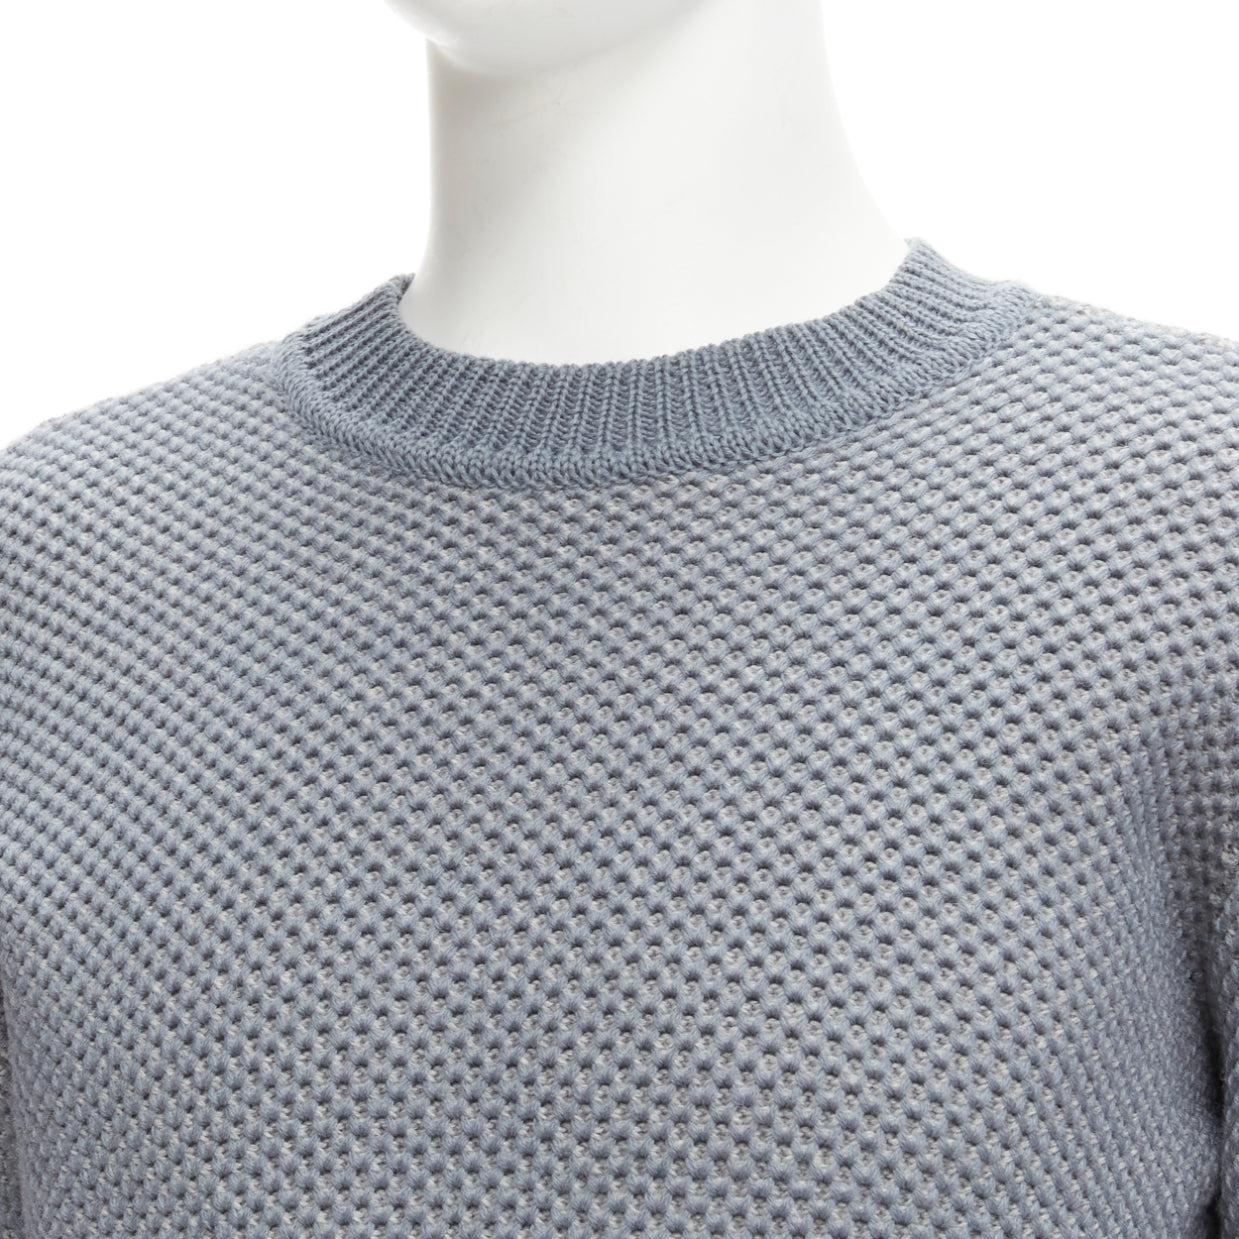 STEPHEN SCHNEIDER 100% textured waffle wool grey crew neck sweater Sz 4 L
Reference: JSLE/A00043
Brand: Stephen Schneider
Material: Wool
Color: Grey
Pattern: Solid
Closure: Pullover
Extra Details: Beautiful thick textured wool.
Made in: